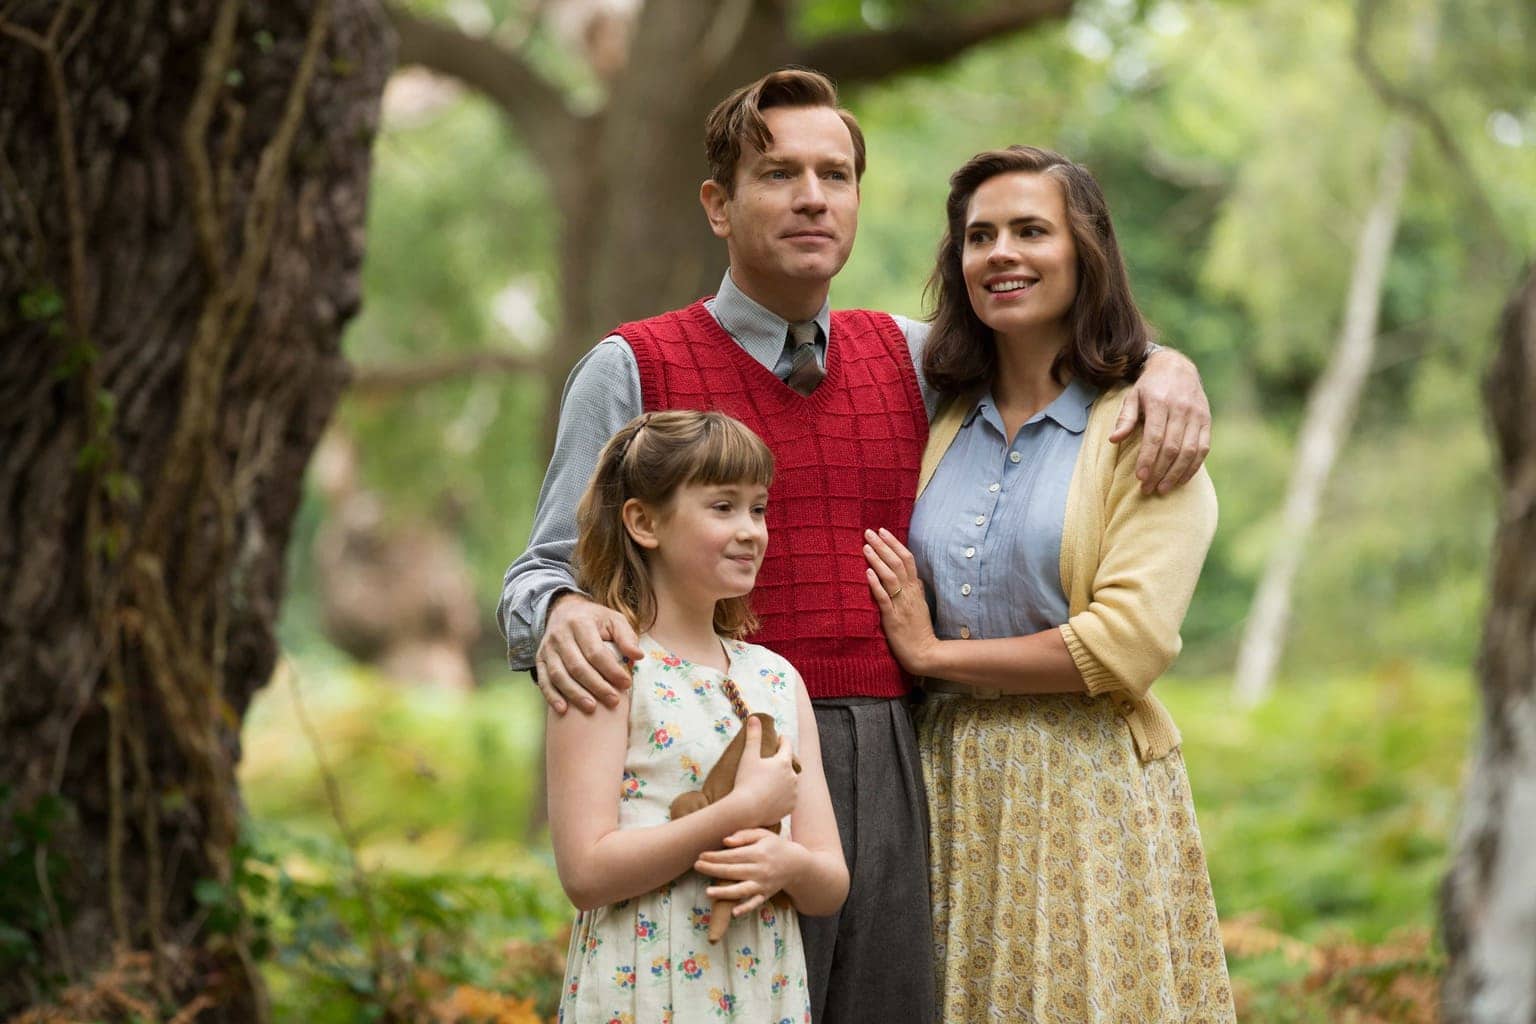 Review of Disney's Christopher Robin Movie